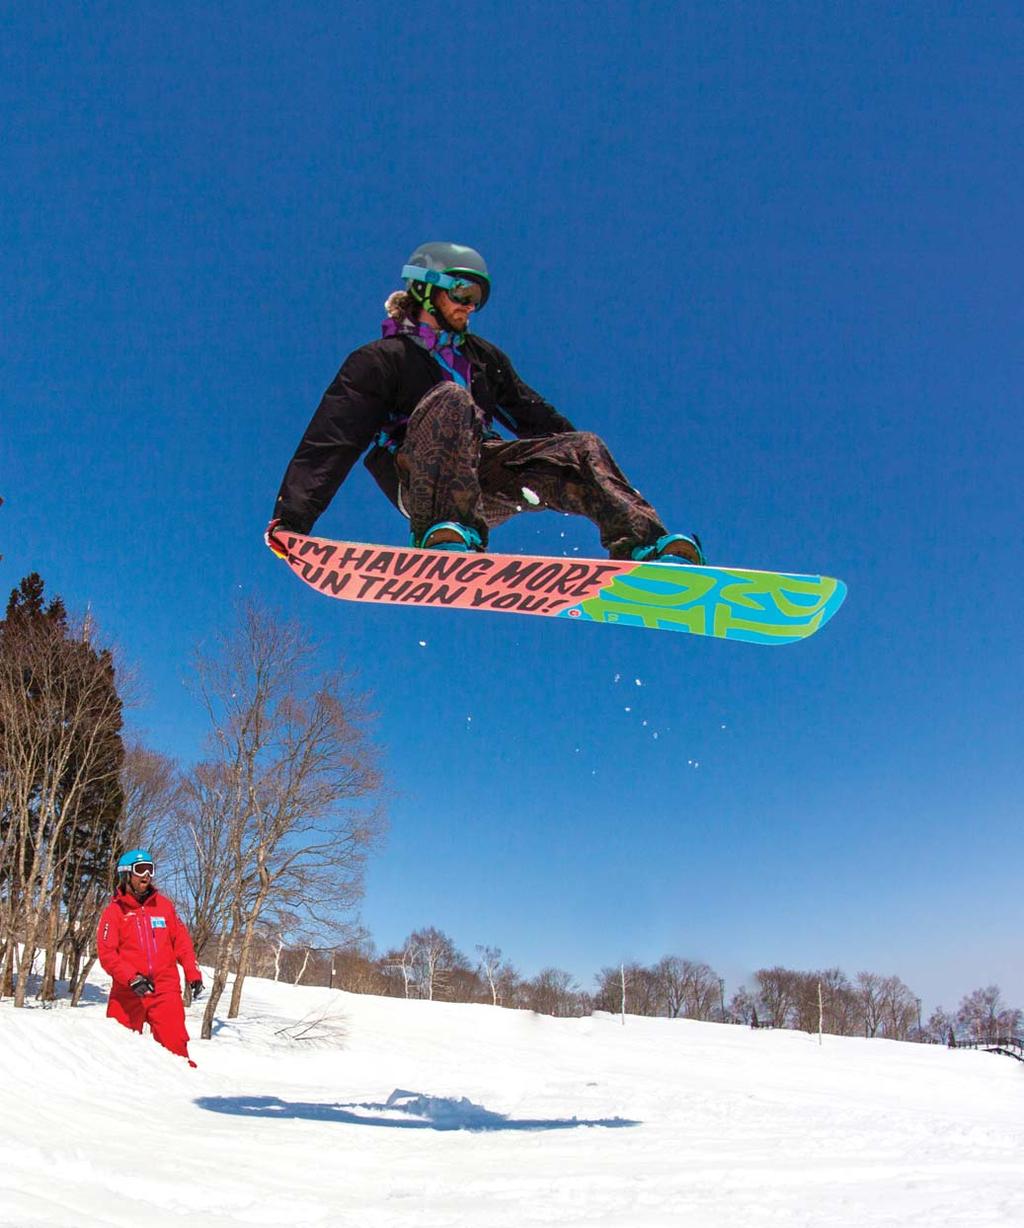 Adults 15+ yrs GROUP SKI & SNOWBOARD CLINICS SPECIALTY CLINICS PROGRAM TIMES ABILITY LEVEL MEET START FINISH APRÈS DRINK Levels 4 to 5 1:15pm 1:30pm 3:30pm 3:35pm FEATURES For advanced to expert